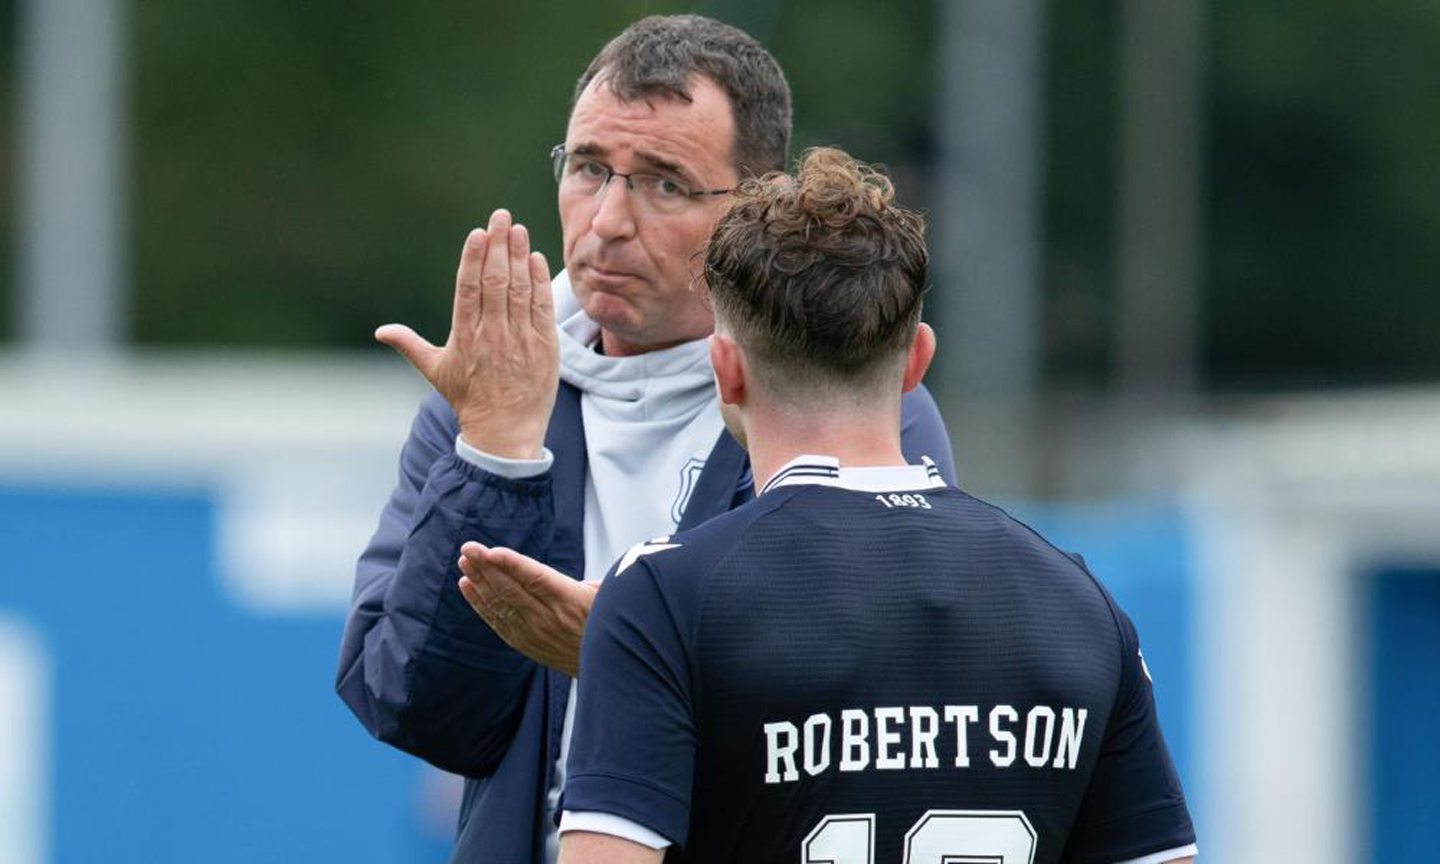 Dundee boss Gary Bowyer in conversation with midfielder Fin Robertson after full-time at Stranraer.